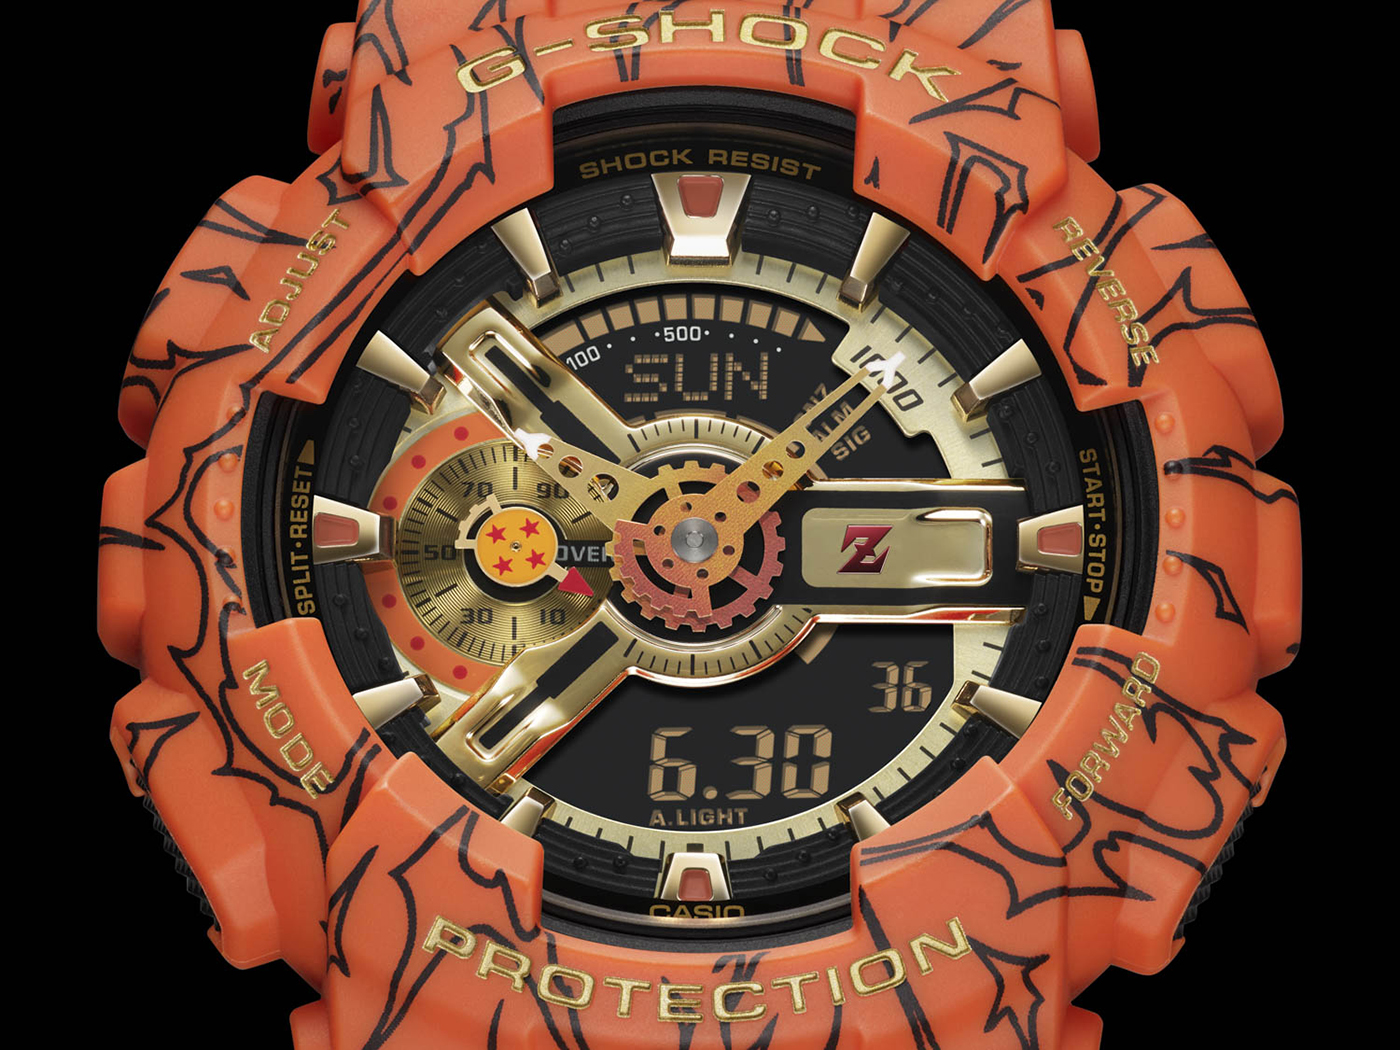 Casio Teams Up With Dragon Ball Z For Limited-Edition G-Shock